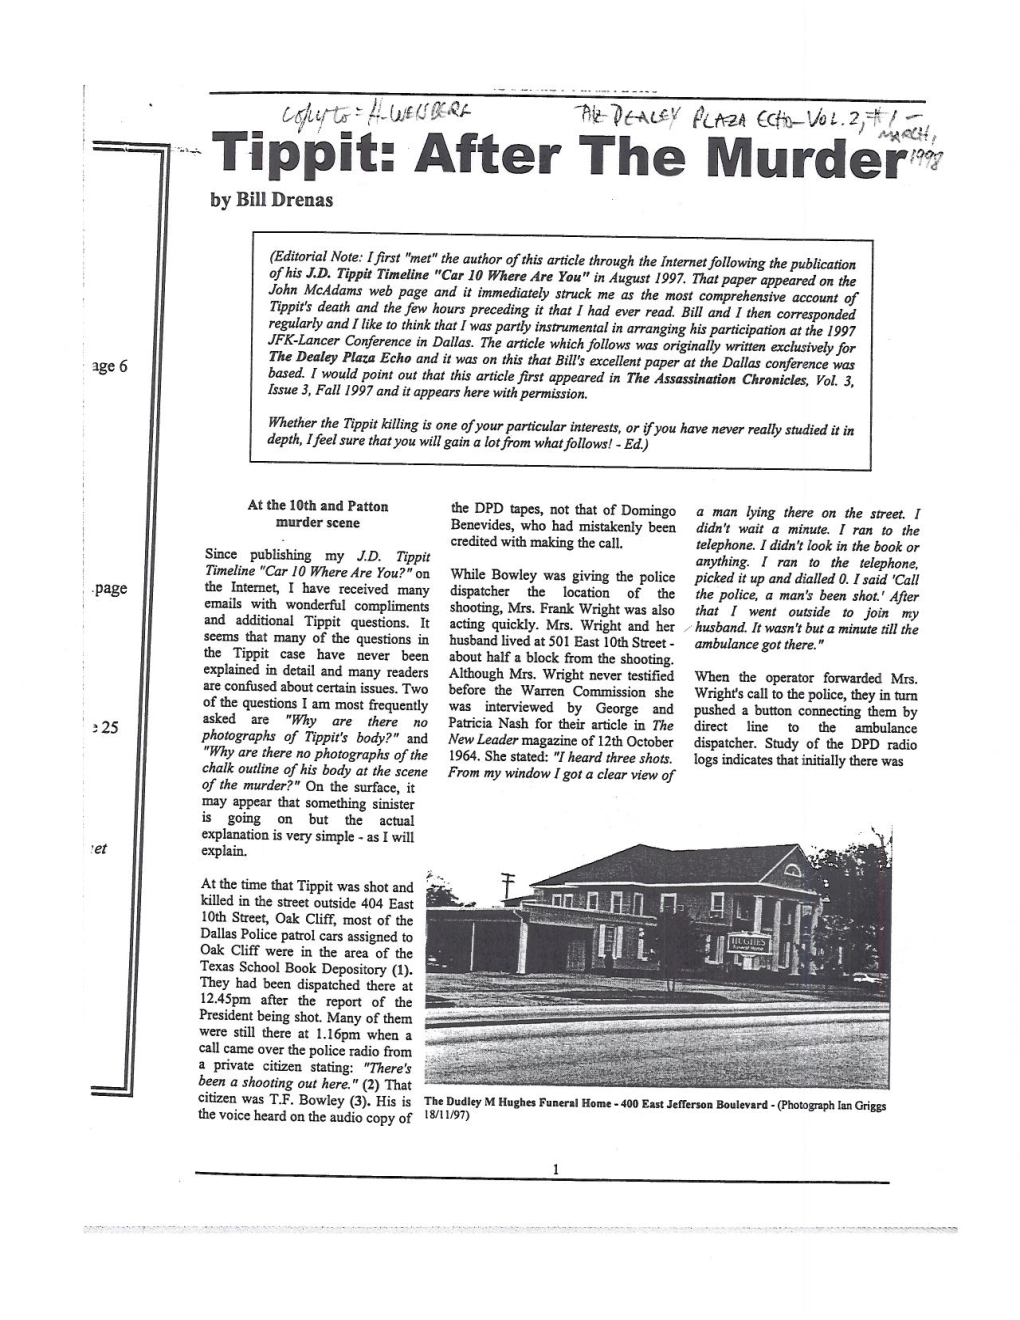 Tipp At: After the Murder by Bill Drenas